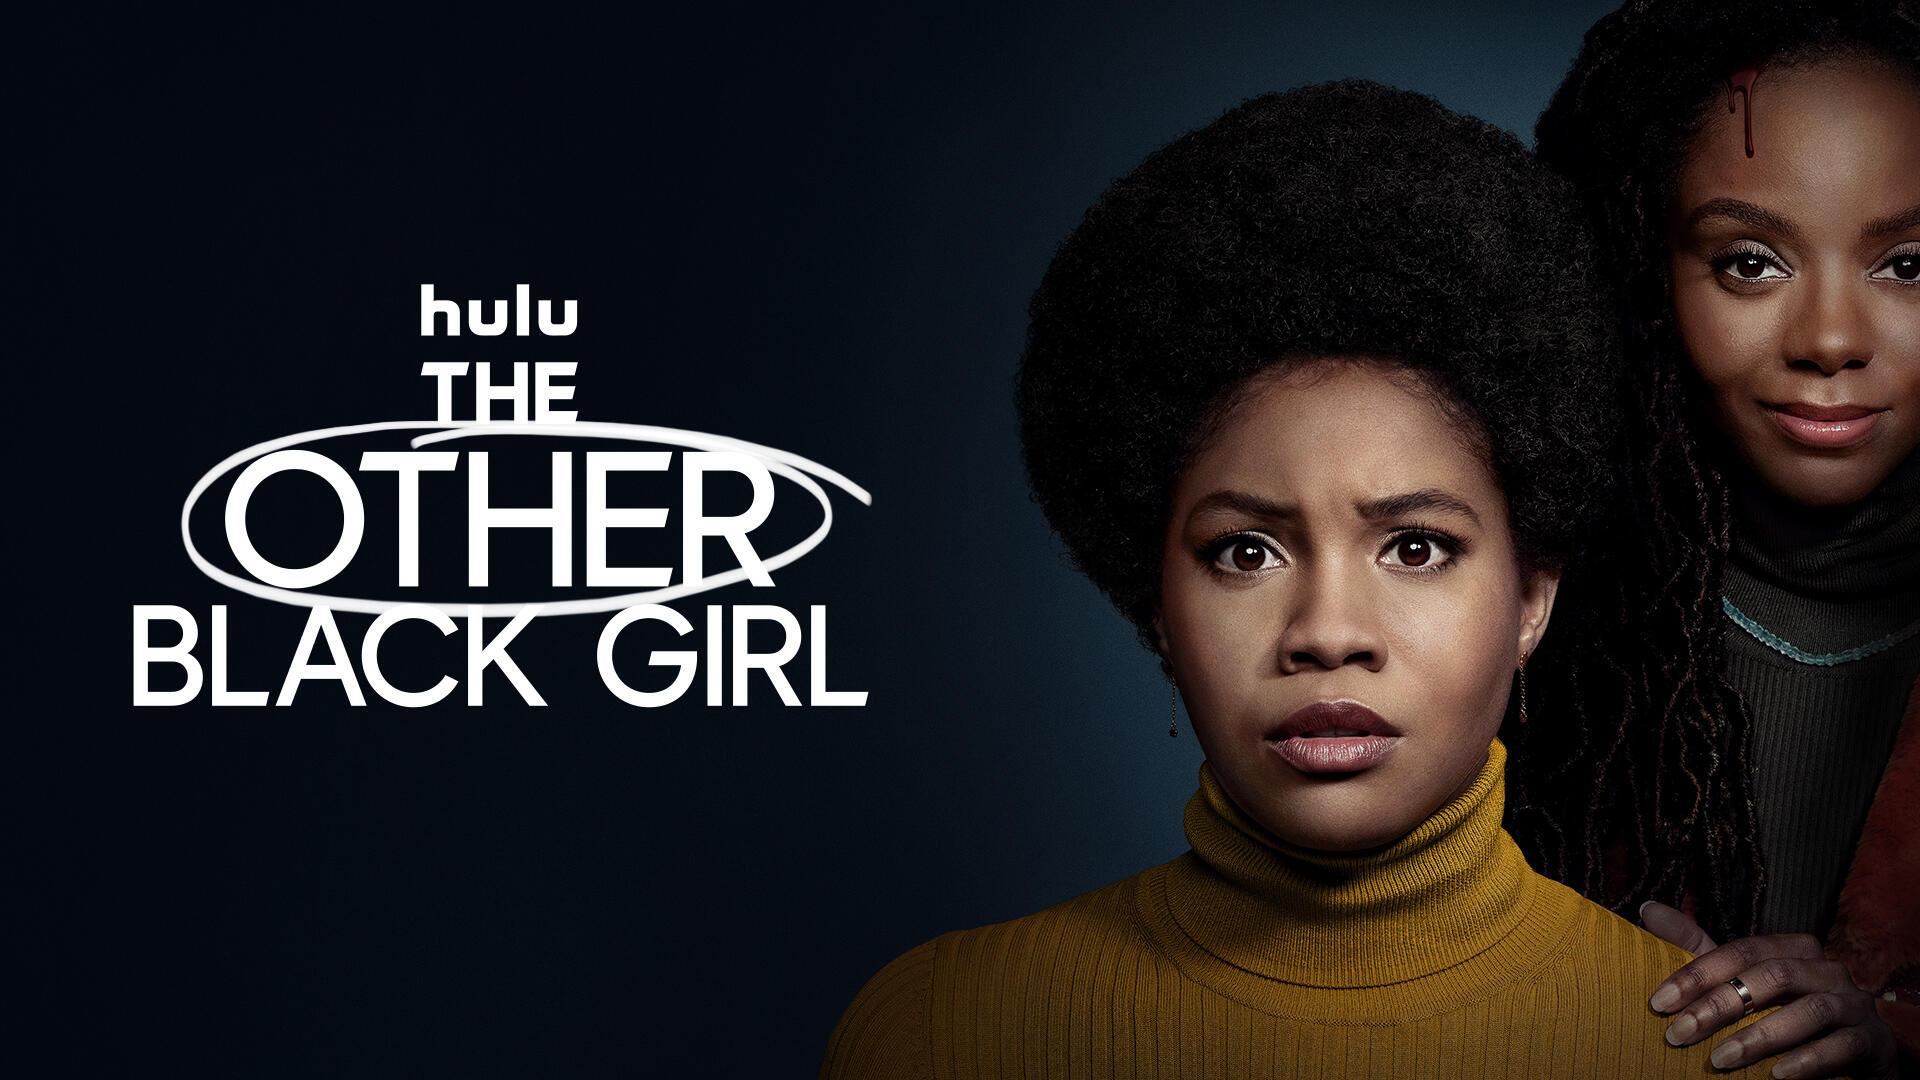 The Other Black Girl -- Nella, an editorial assistant, is tired of being the only Black girl at her company, so she’s excited when Hazel is hired. But as Hazel’s star begins to rise, Nella spirals out and discovers something sinister is going on at the company. Nella (Sinclair Daniel) and Hazel (Ashleigh Murray), shown. (Courtesy of Hulu)